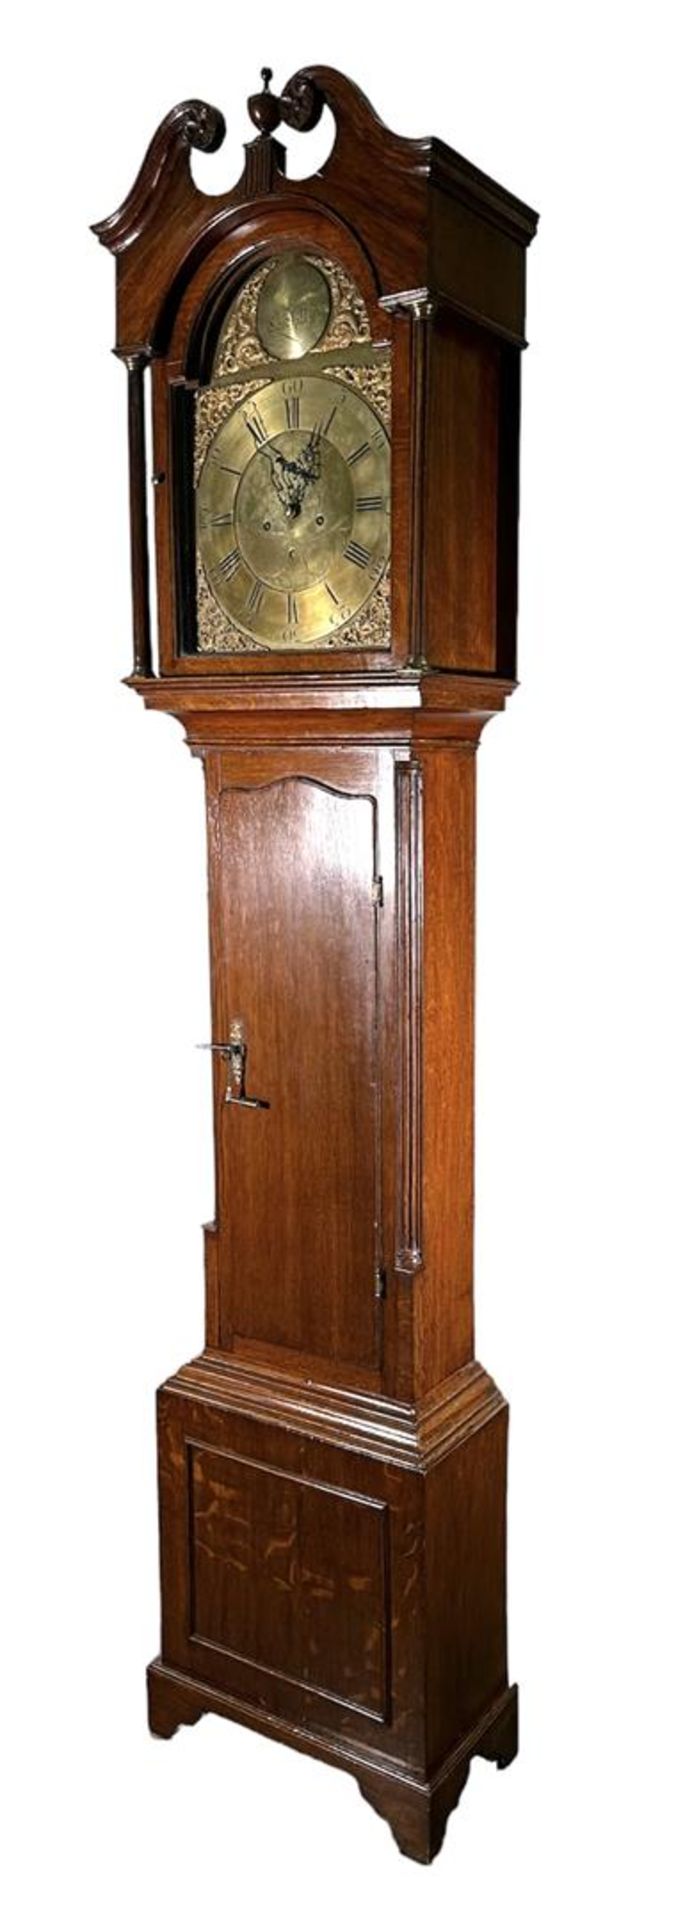 An English Grandfather clock. 18th century. - Image 2 of 3